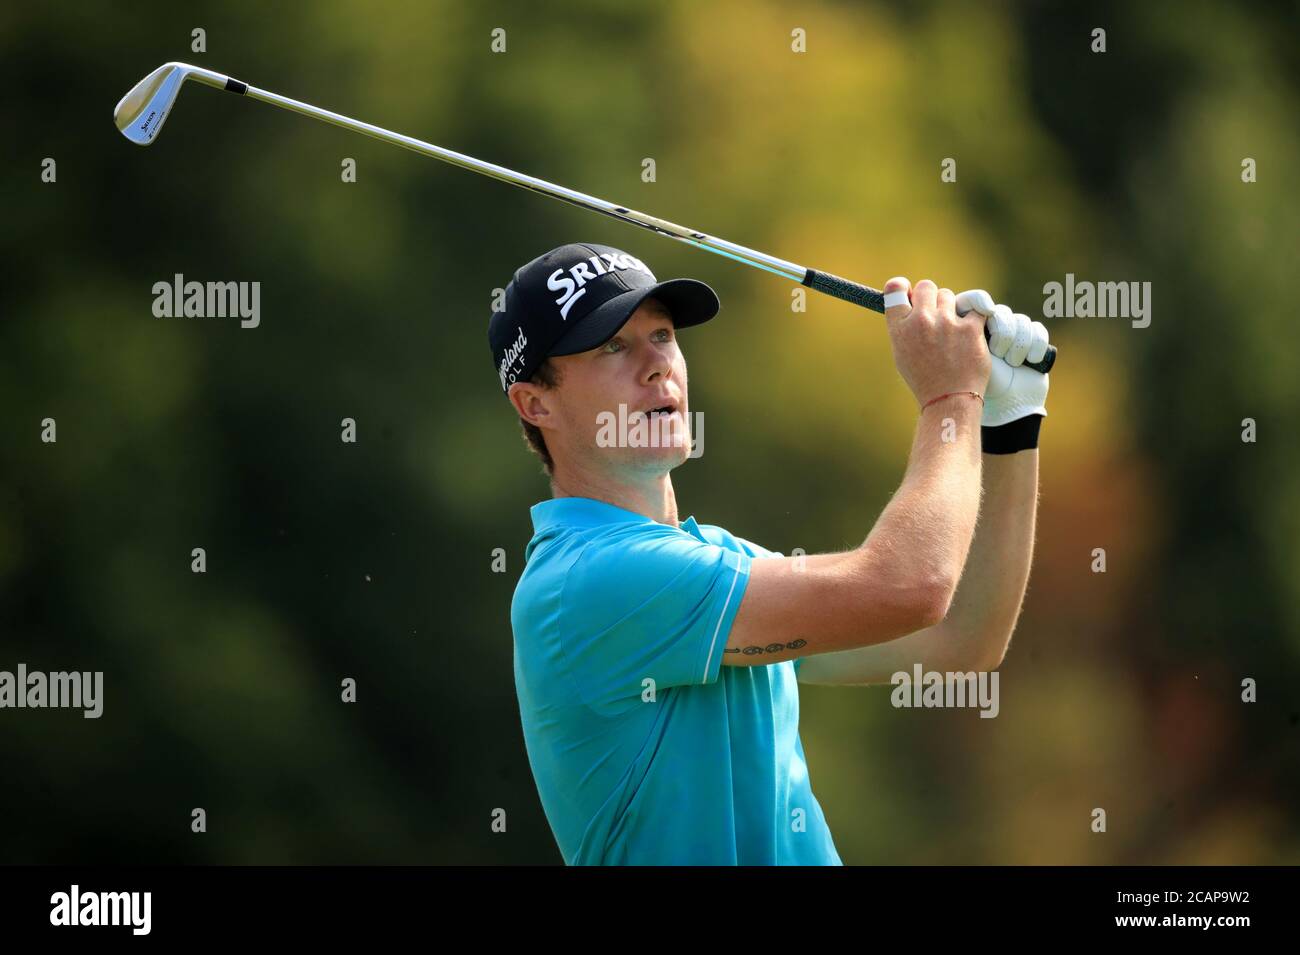 USA's Sean Crocker during day three of the English Championship at Hanbury Manor Marriott Hotel and Country Club, Hertfordshire. Saturday August 8, 2020. See PA story Golf Ware. Photo credit should read: Adam Davy/PA Wire. RESTRICTIONS: Editorial Use, No Commercial Use. Stock Photo